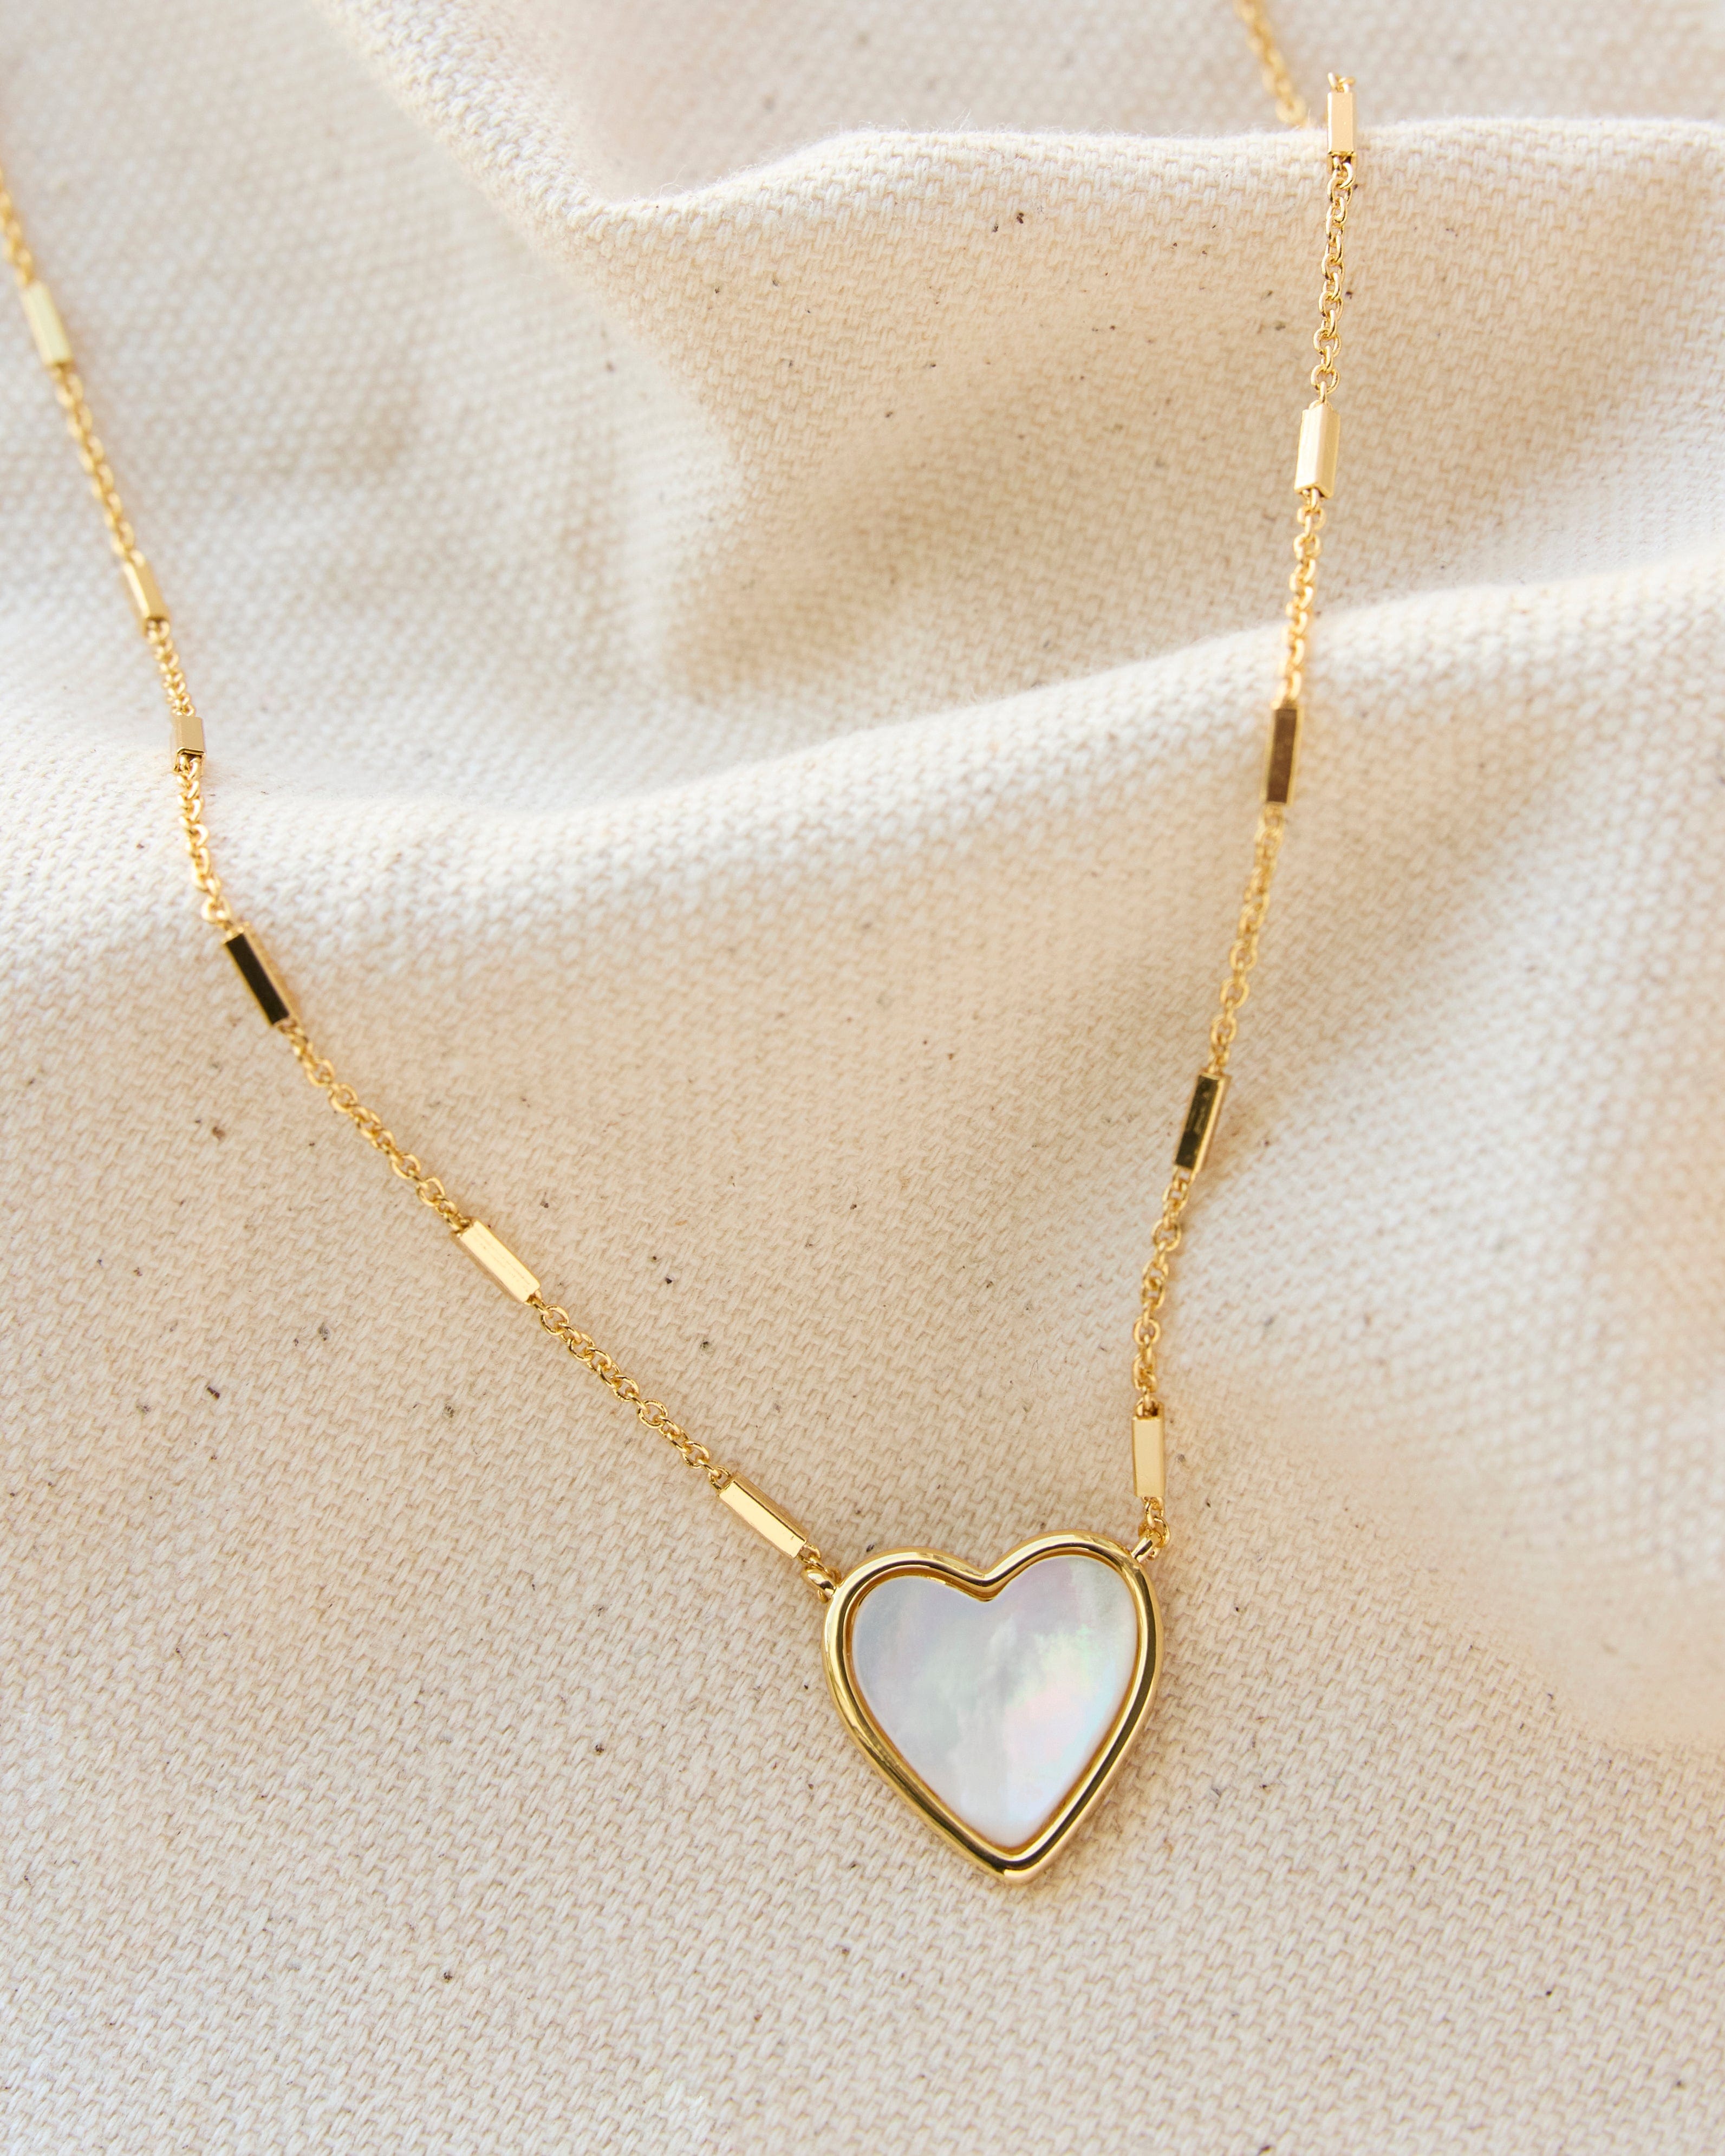 Gold necklace with mother of pearl pendant in heart shape.